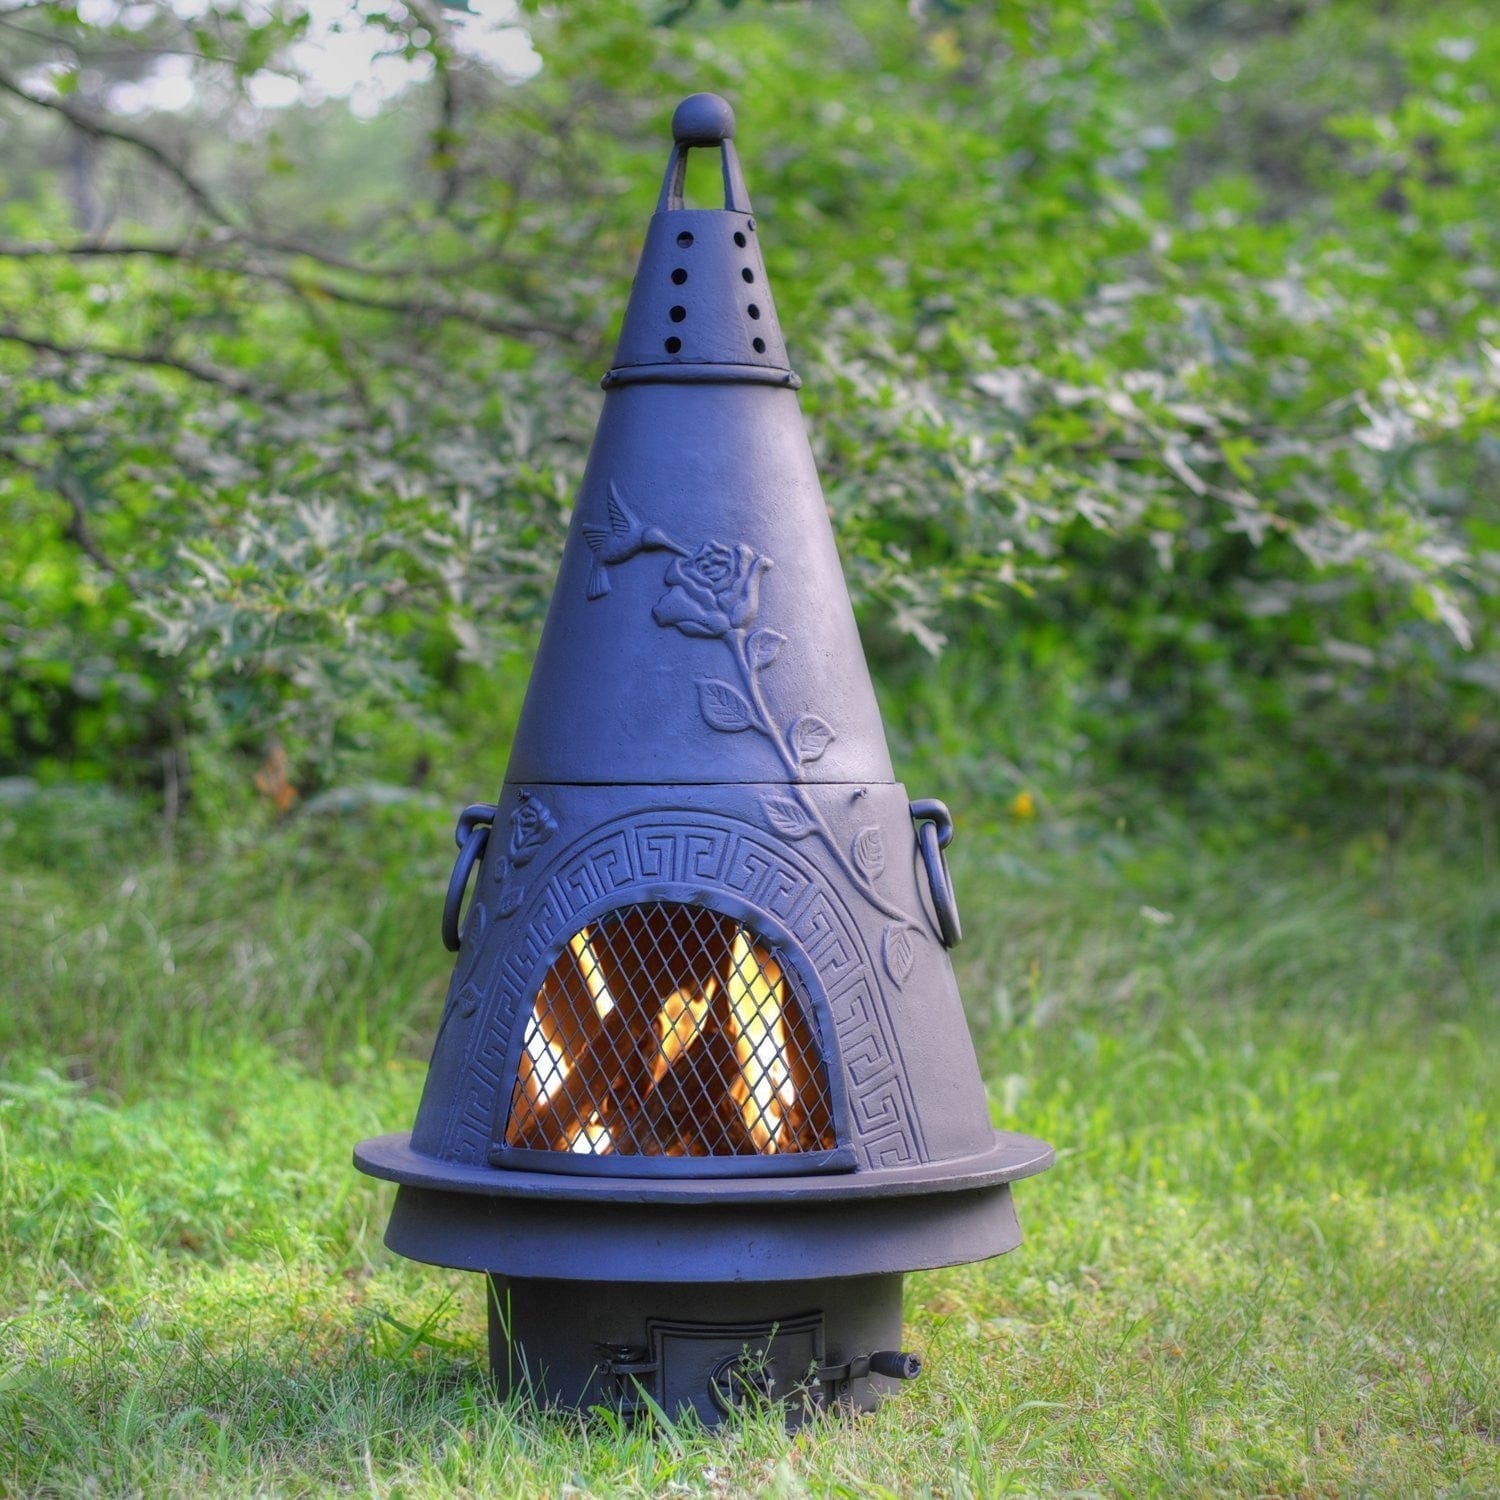 The Blue Rooster Garden Chiminea